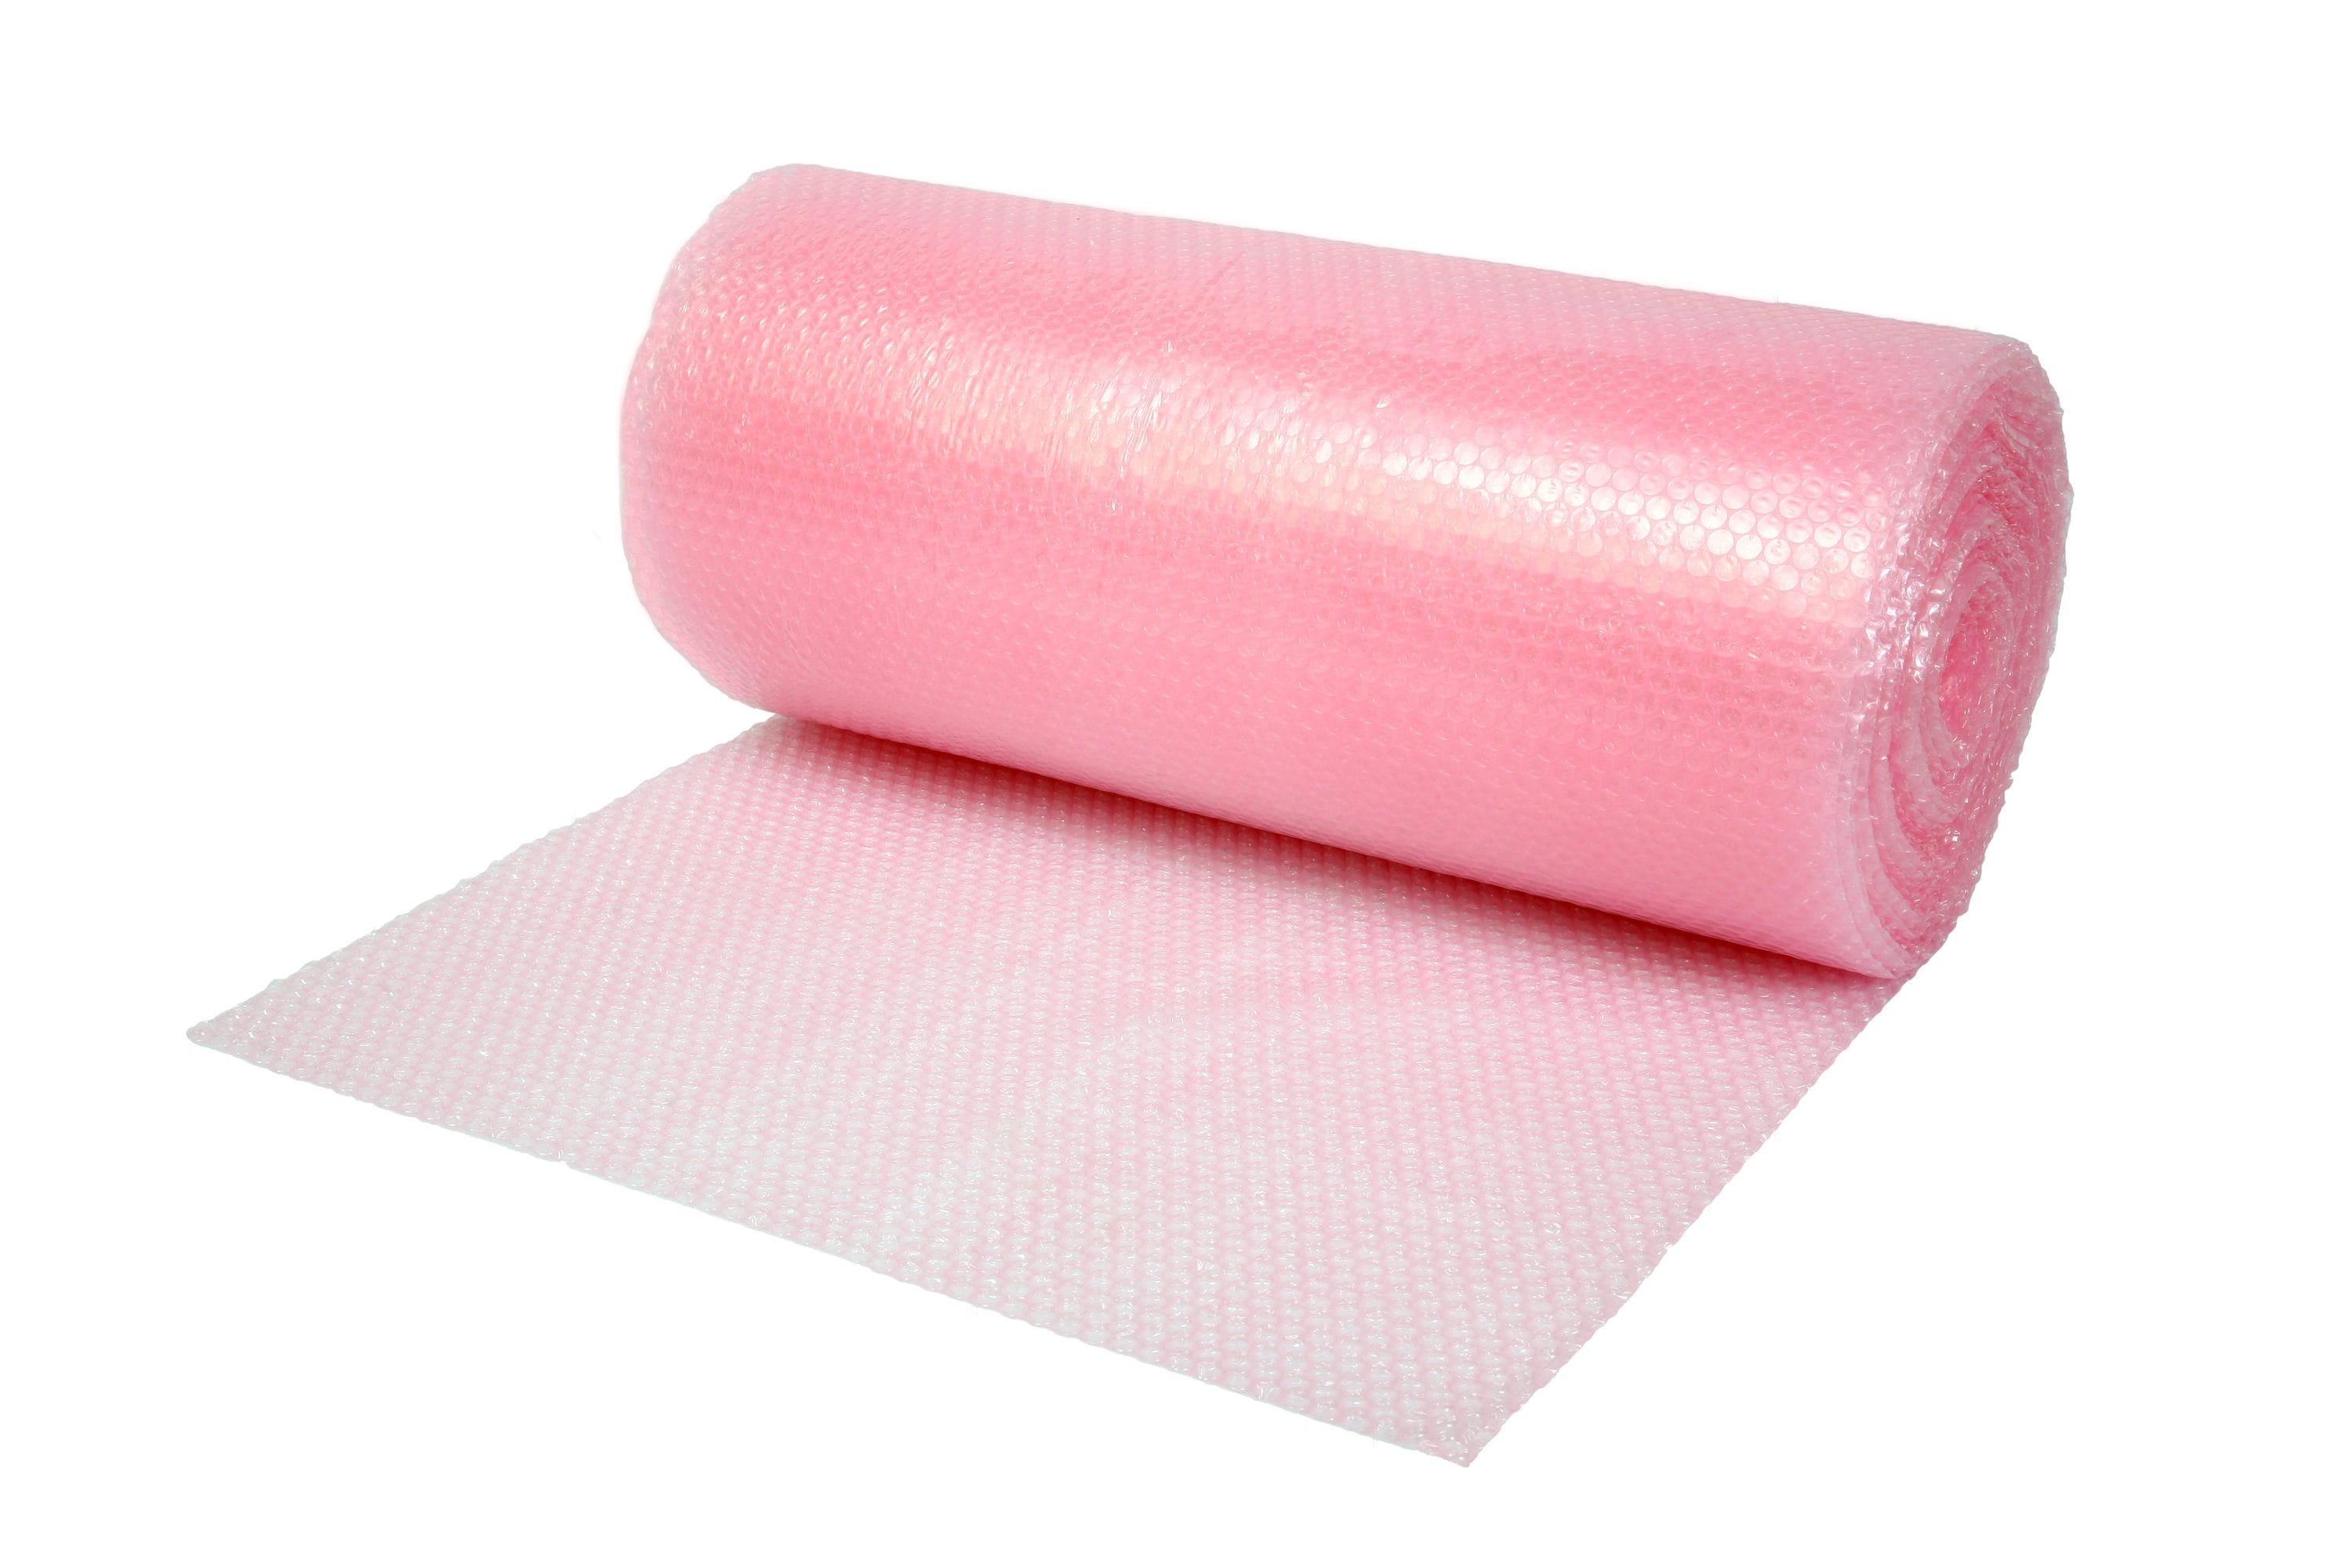 PINK HEART BUBBLE AIR CUSHION WRAP 8 x 30ft Roll Special Festive Romantic  Gift 